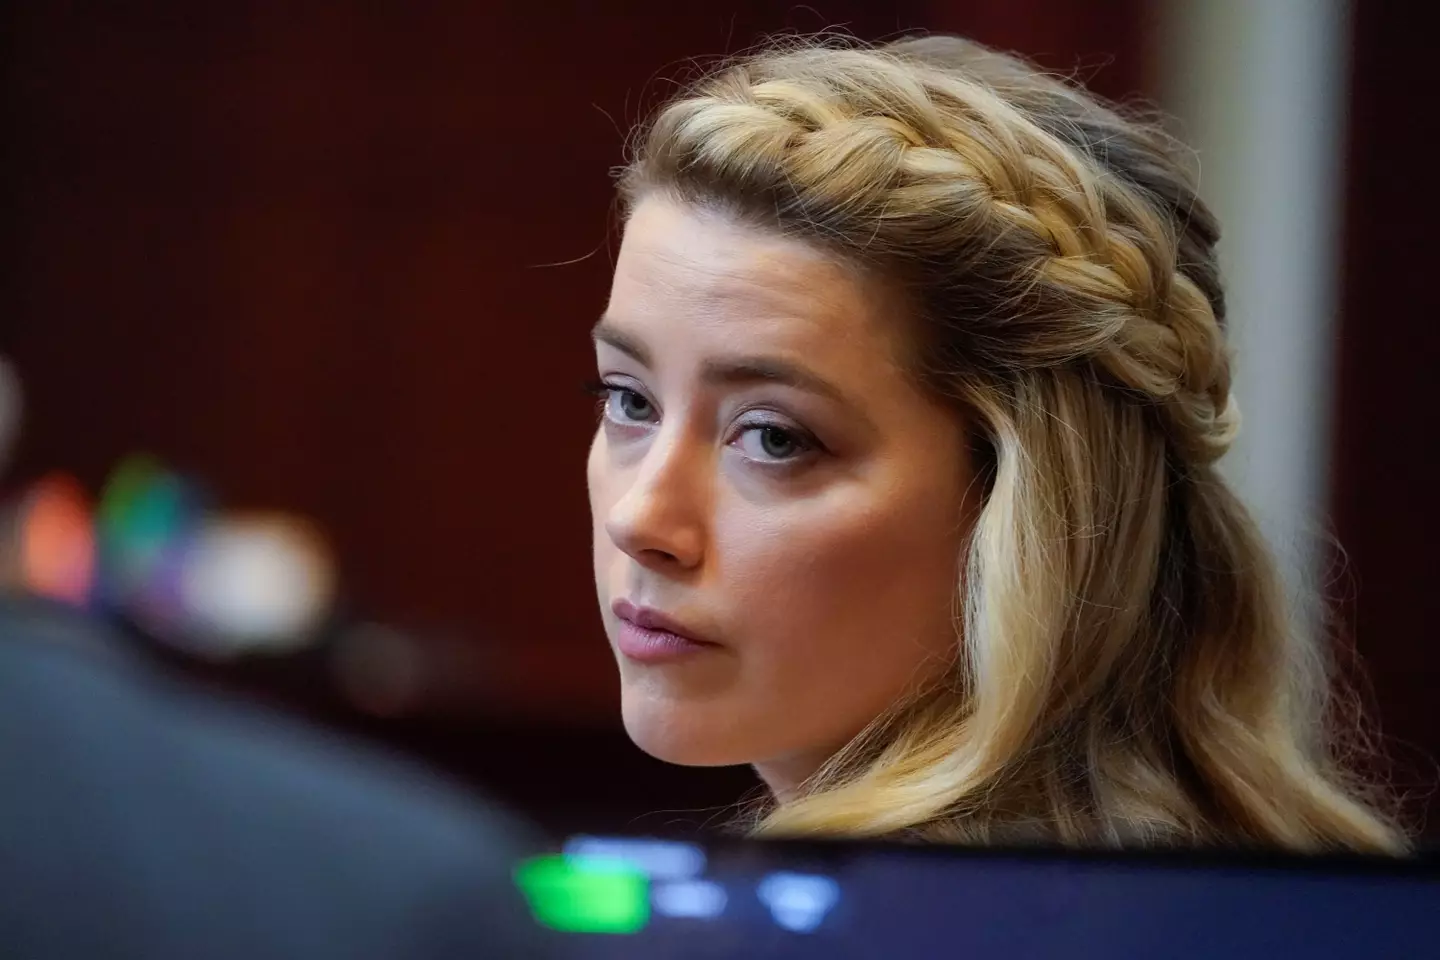 Amber Heard lost the case Johnny Depp brought against her.